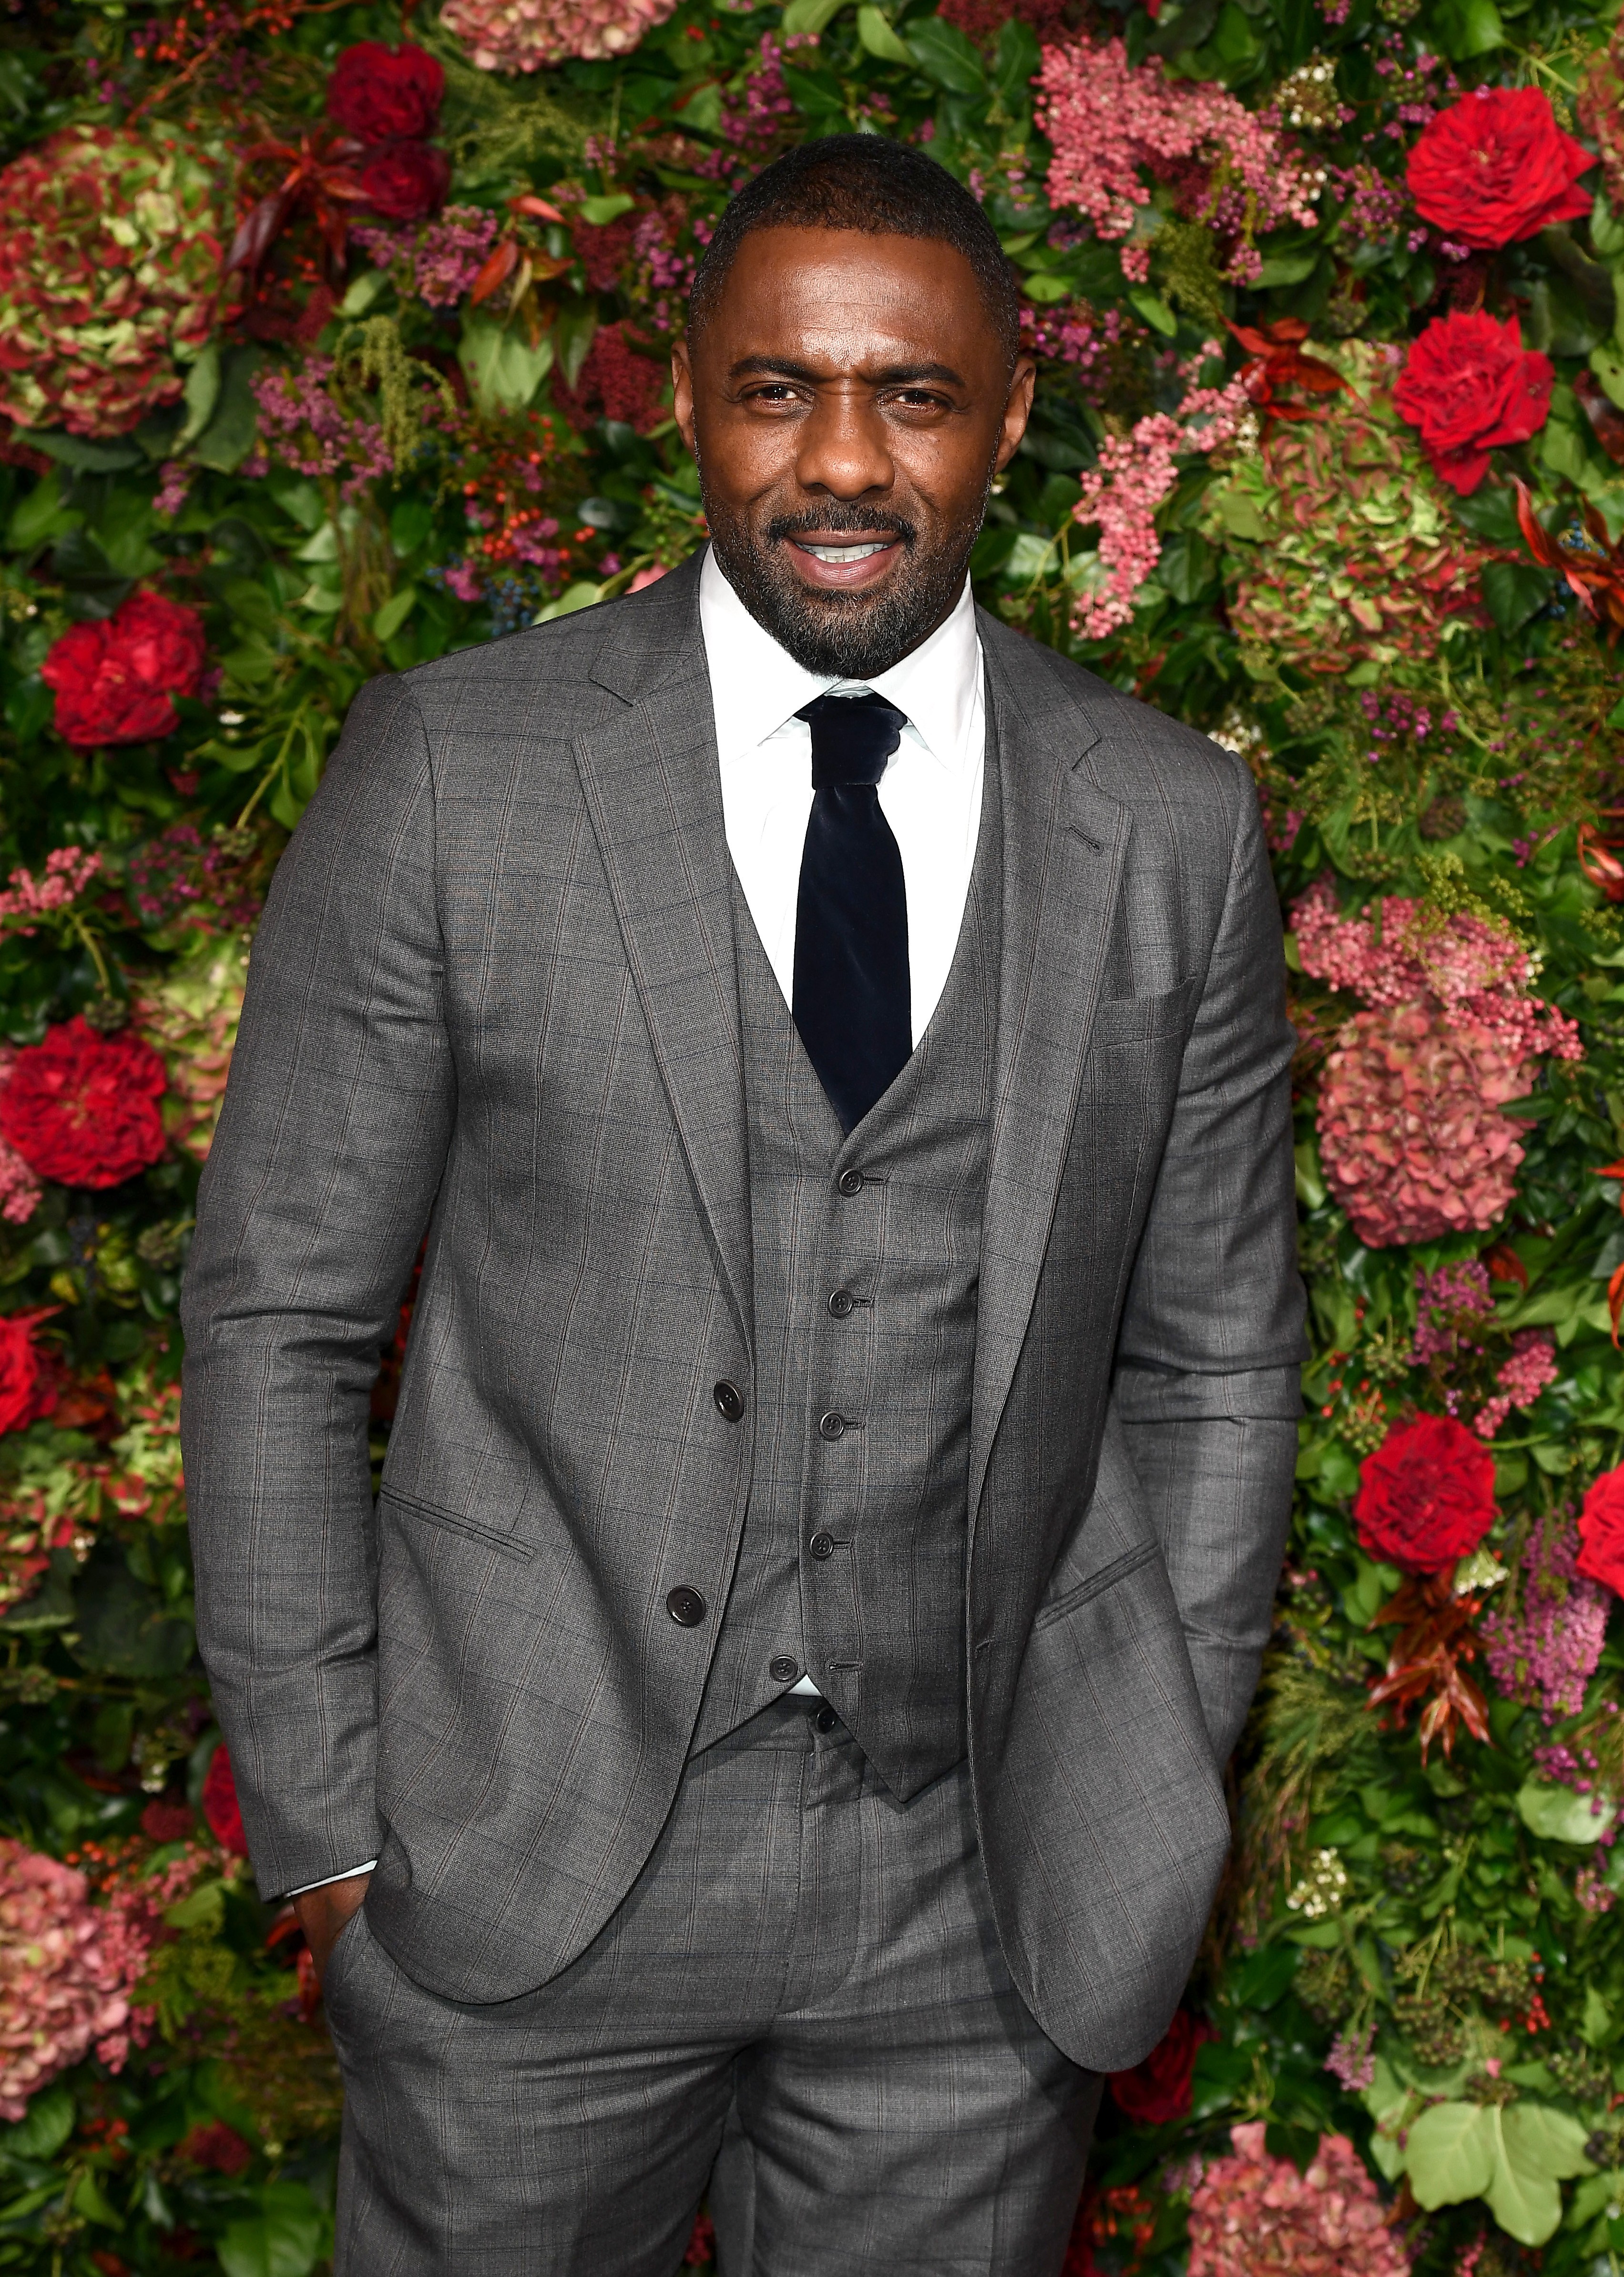 LONDON, ENGLAND - NOVEMBER 18:  Idris Elba attends the Evening Standard Theatre Awards 2018 at the Theatre Royal on November 18, 2018 in London, England. (Photo by Jeff Spicer/Getty Images) (Foto: Getty Images)